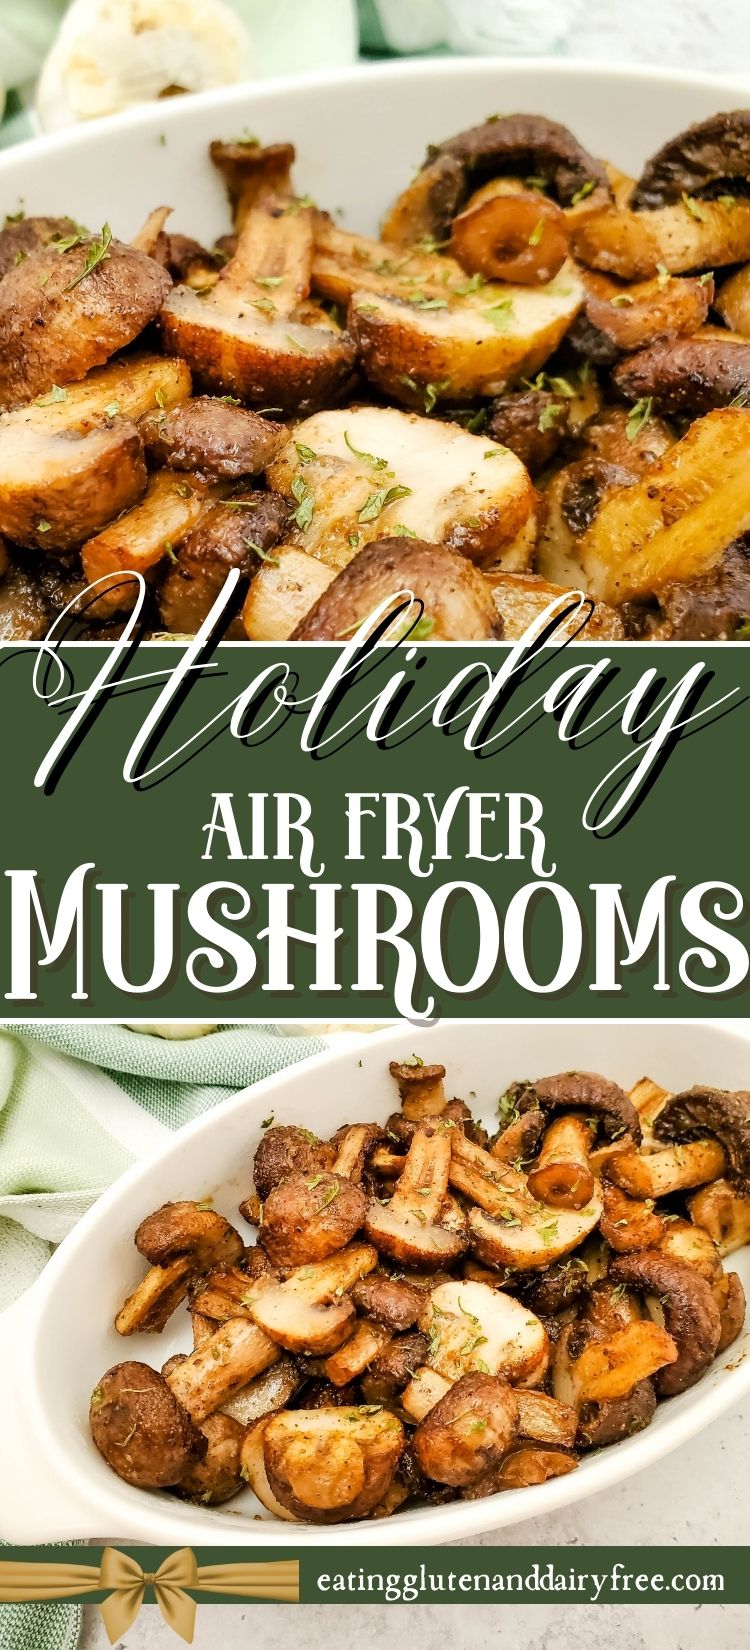 Mushrooms made in the Air Fryer in a white bowl with text overlay.